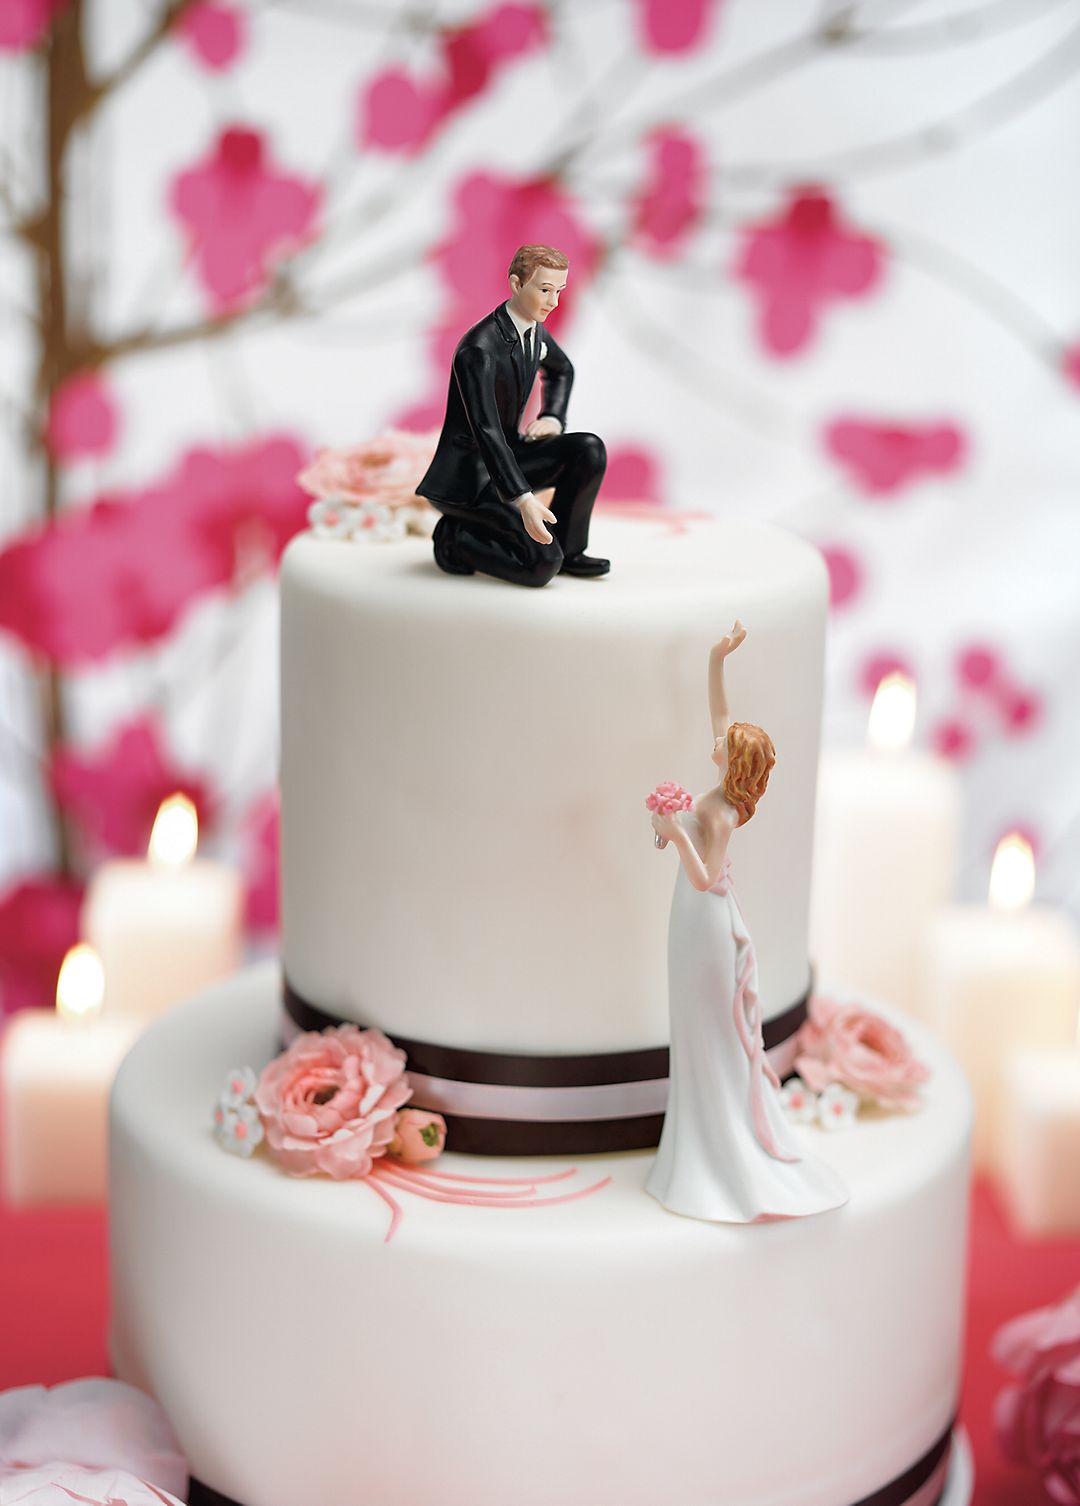 Reaching Bride and Helpful Groom Cake Toppers Image 1